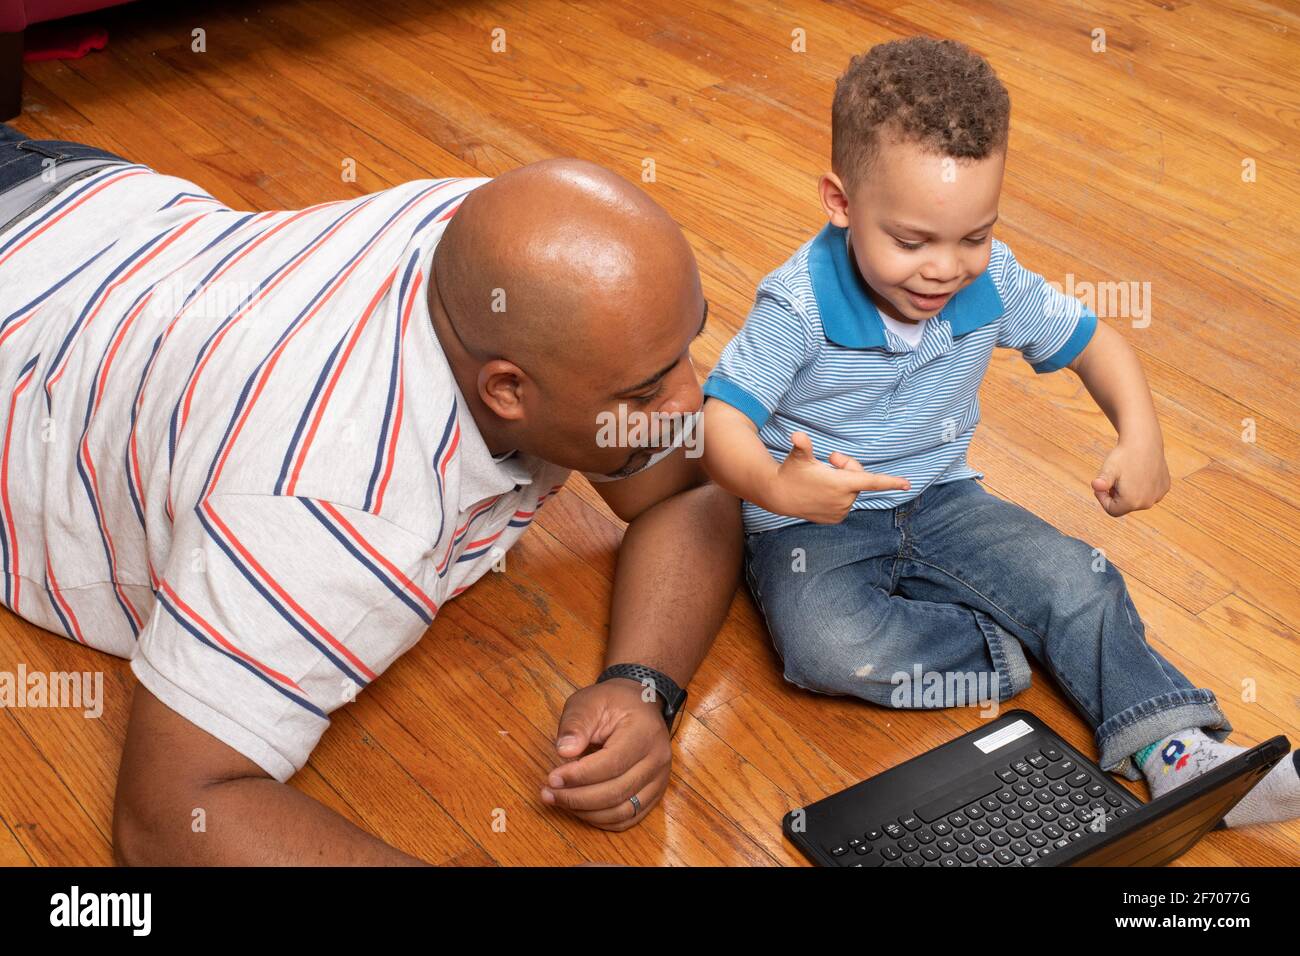 3 year old boy at home with father home learning using ipad provided by school district for at home learning during Covid-19 pandemic Stock Photo